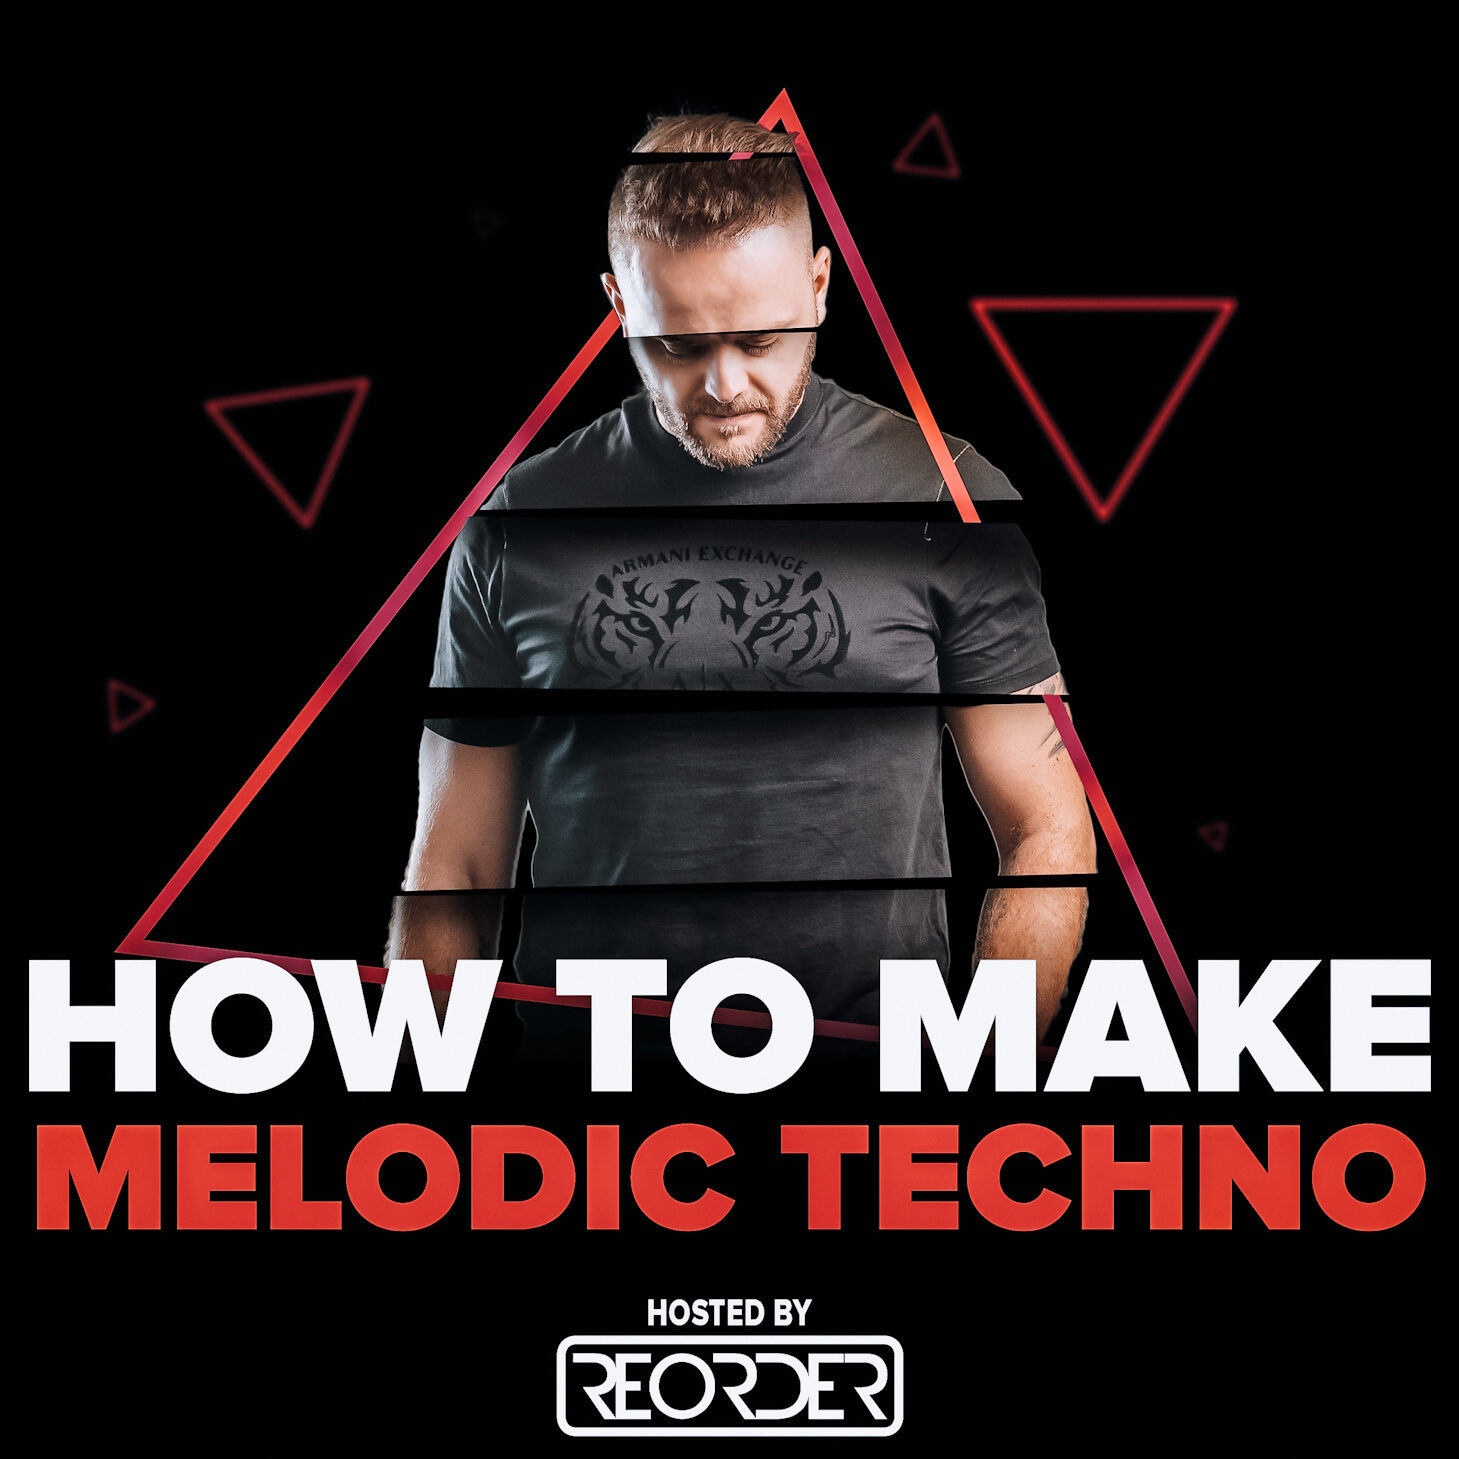 How to Make Melodic Techno